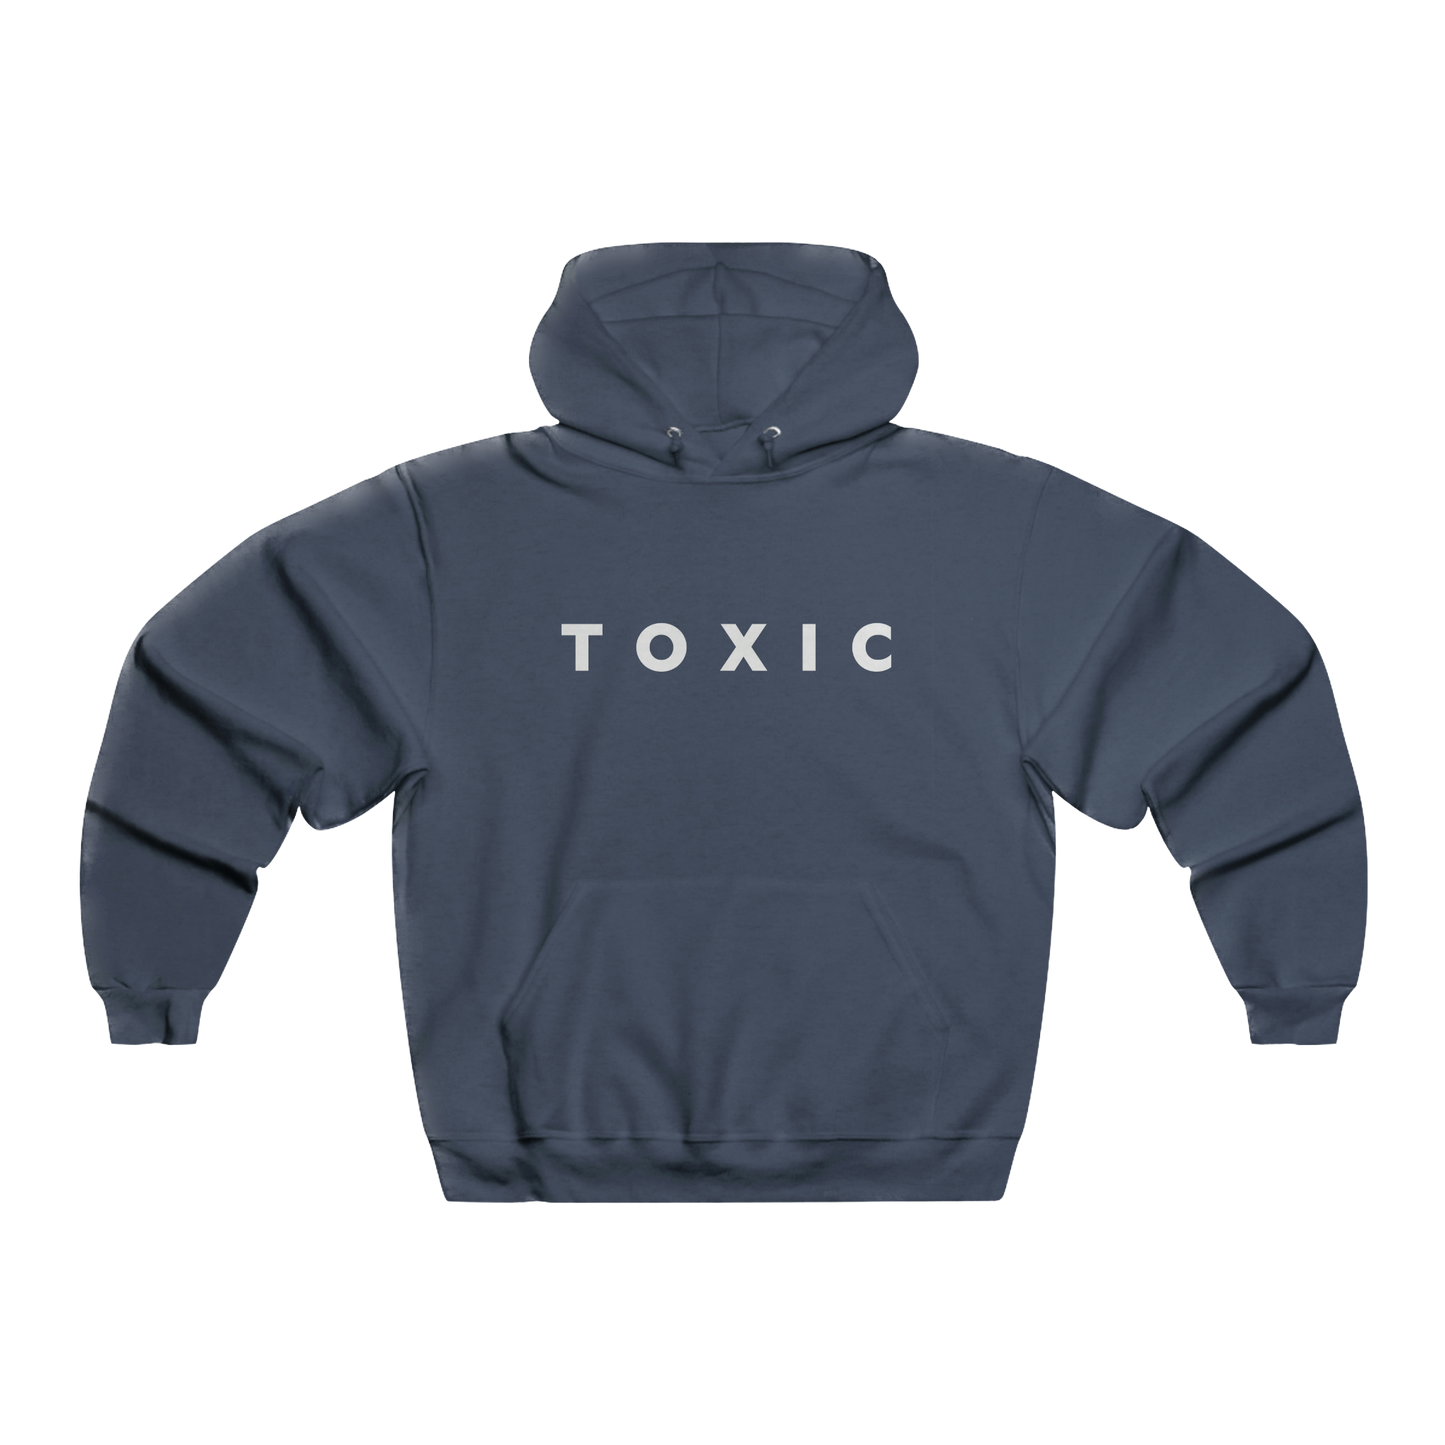 Toxic Graphic Hoodie - Edgy Streetwear for Men and Women | Nile Streetwear"